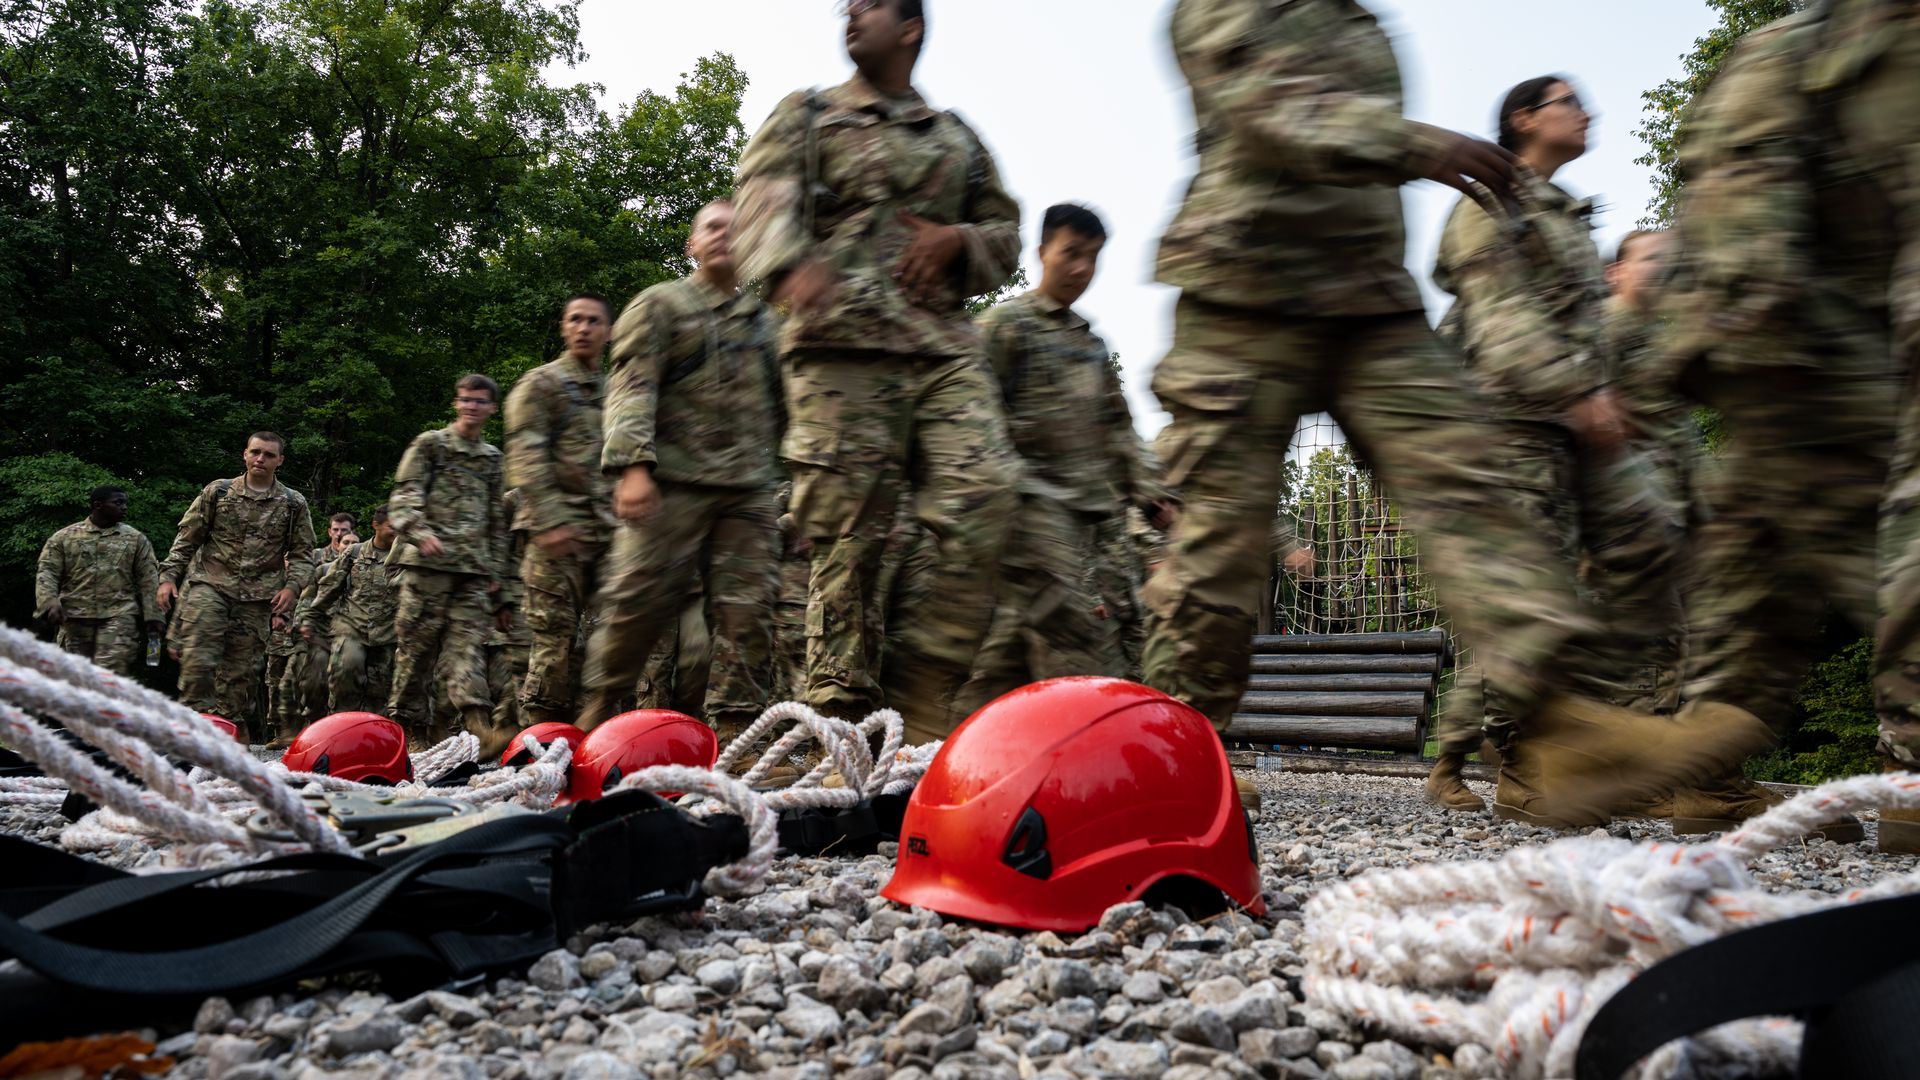 Photo of cadets walking in formation past safety equipment, including rope and a hard hat), in an outdoor camp